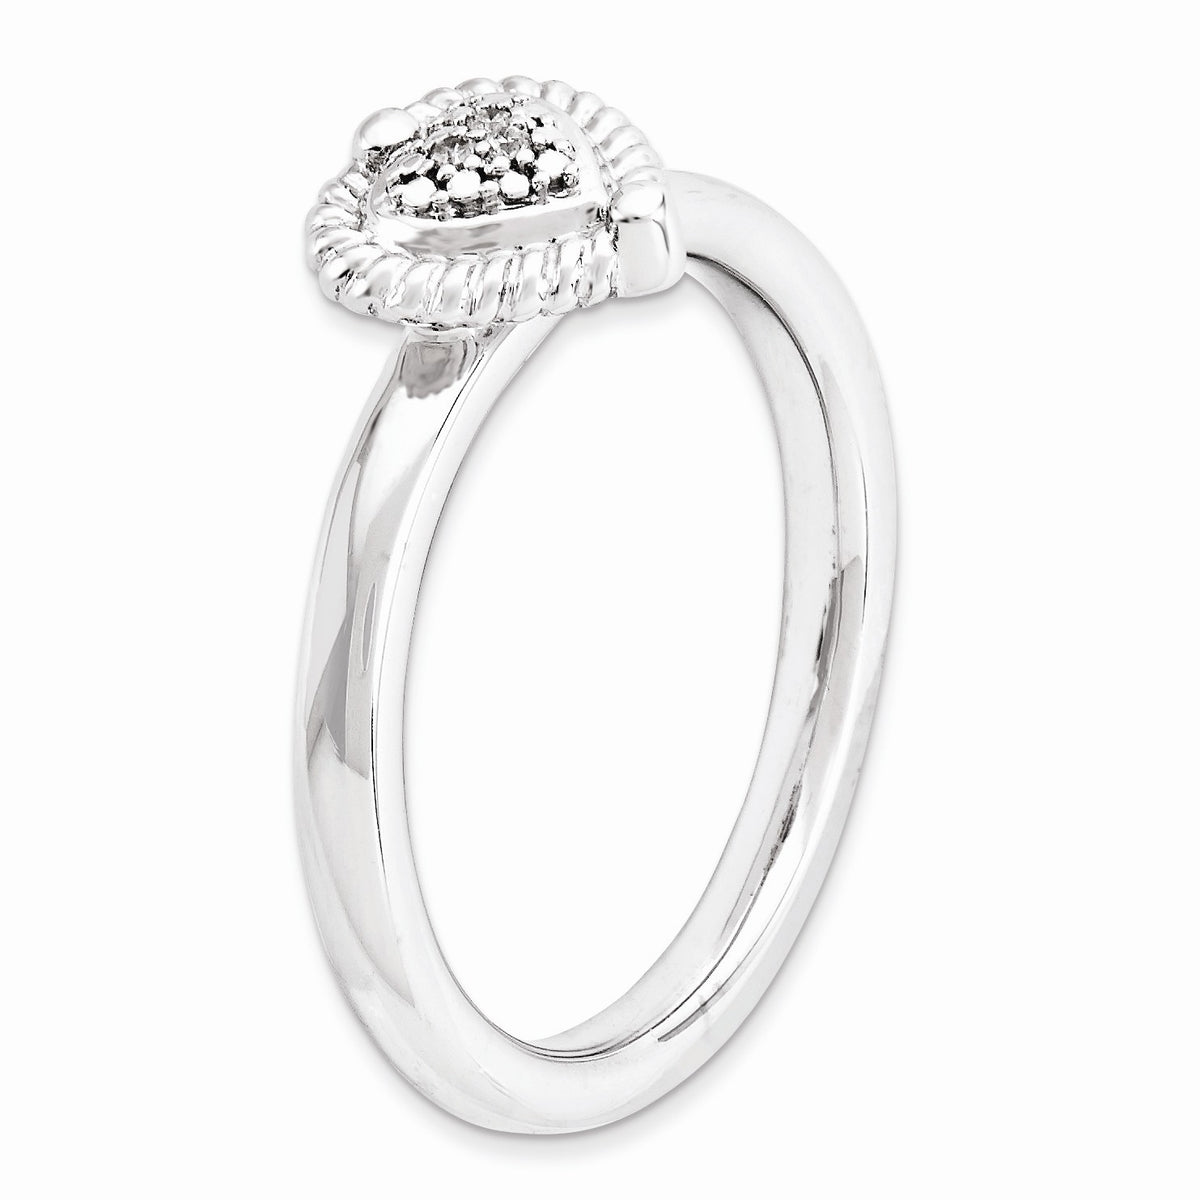 Alternate view of the Sterling Silver Stackable .022 Cttw HI/I3 Diamond 8mm Heart Ring by The Black Bow Jewelry Co.